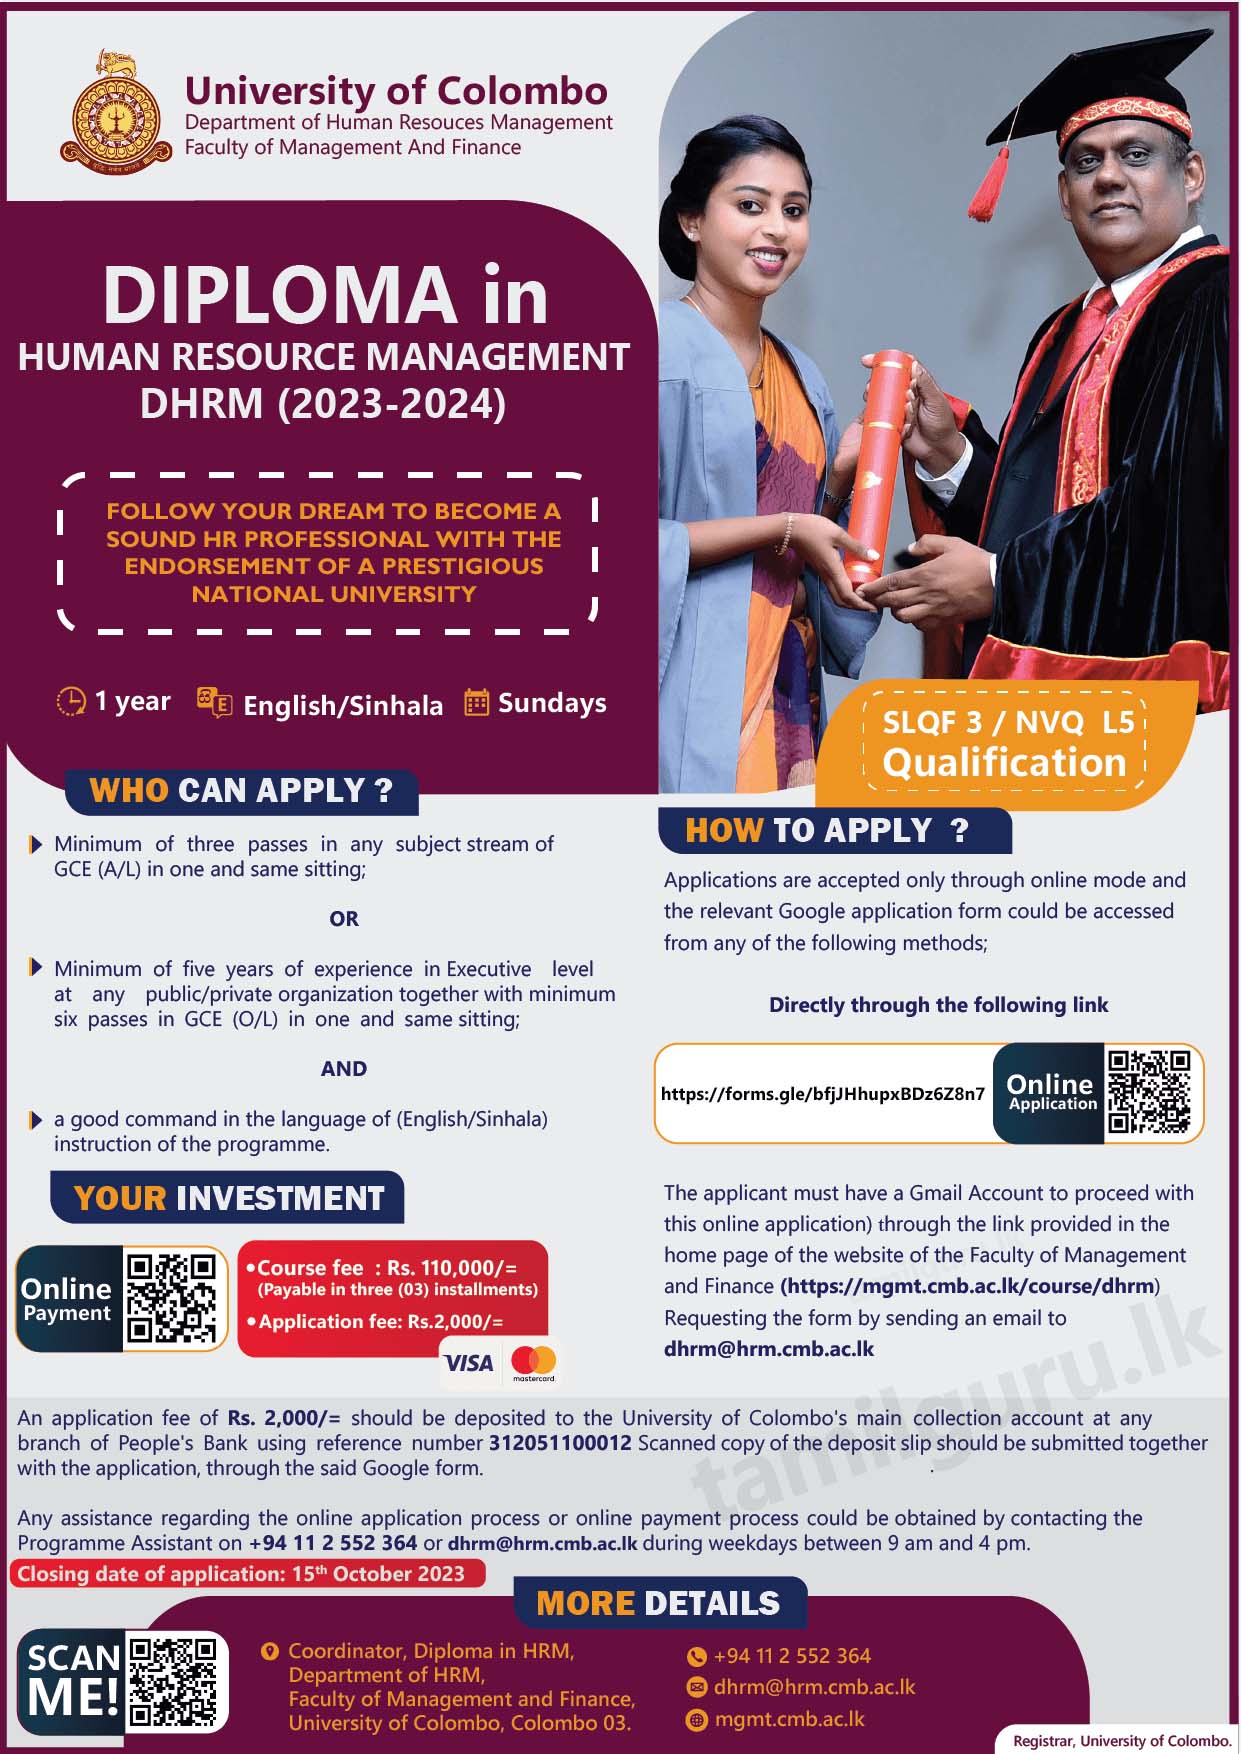 Diploma in Human Resource Management (DHRM) 2023 - University of Colombo